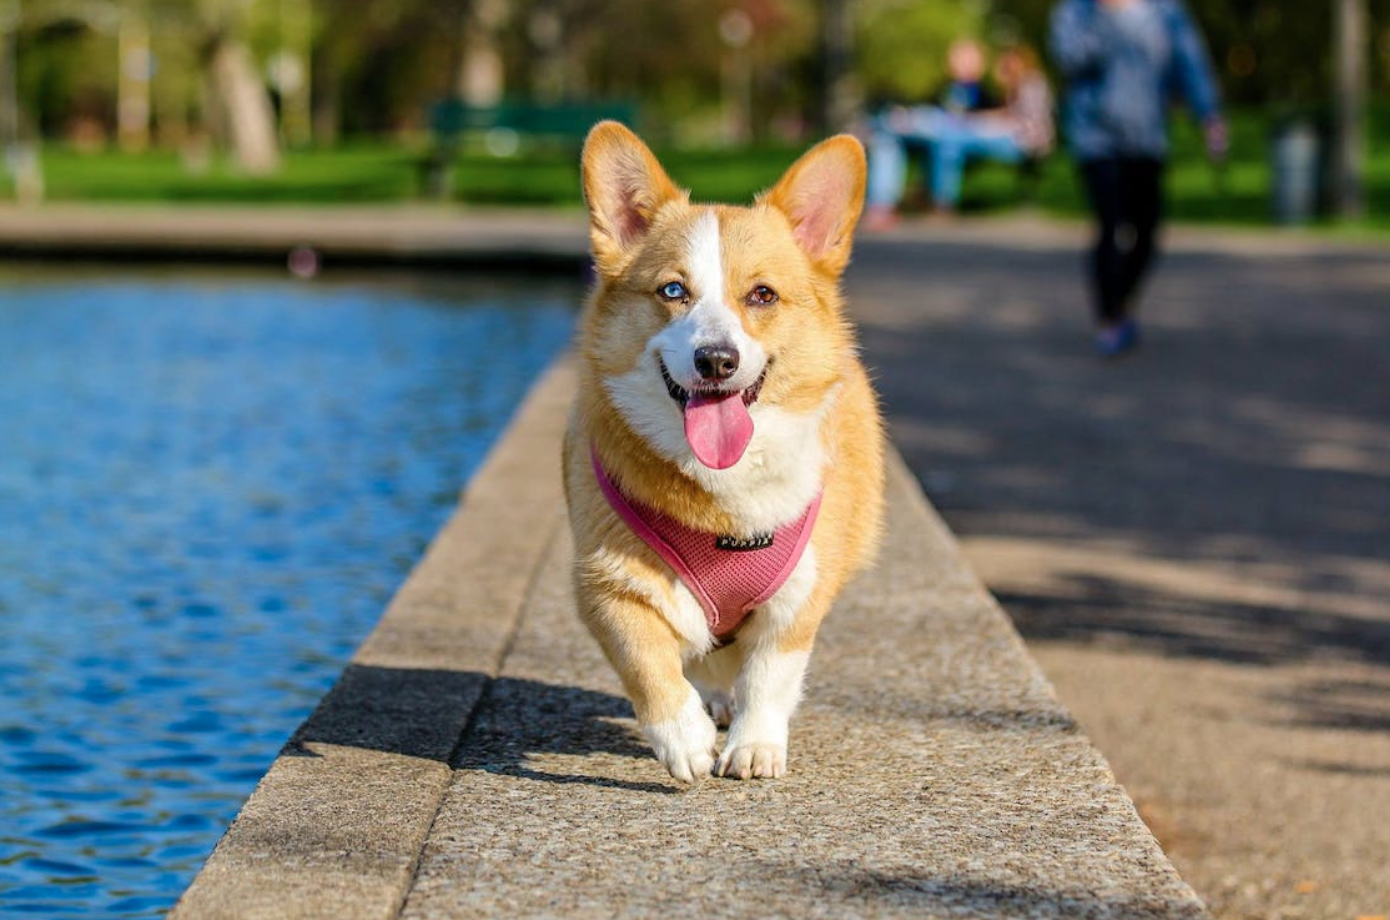 Adult Brown and White Pembroke Welsh Corgi Near the Body of Water; image by Muhannad Alatawi, via Pexels.com.